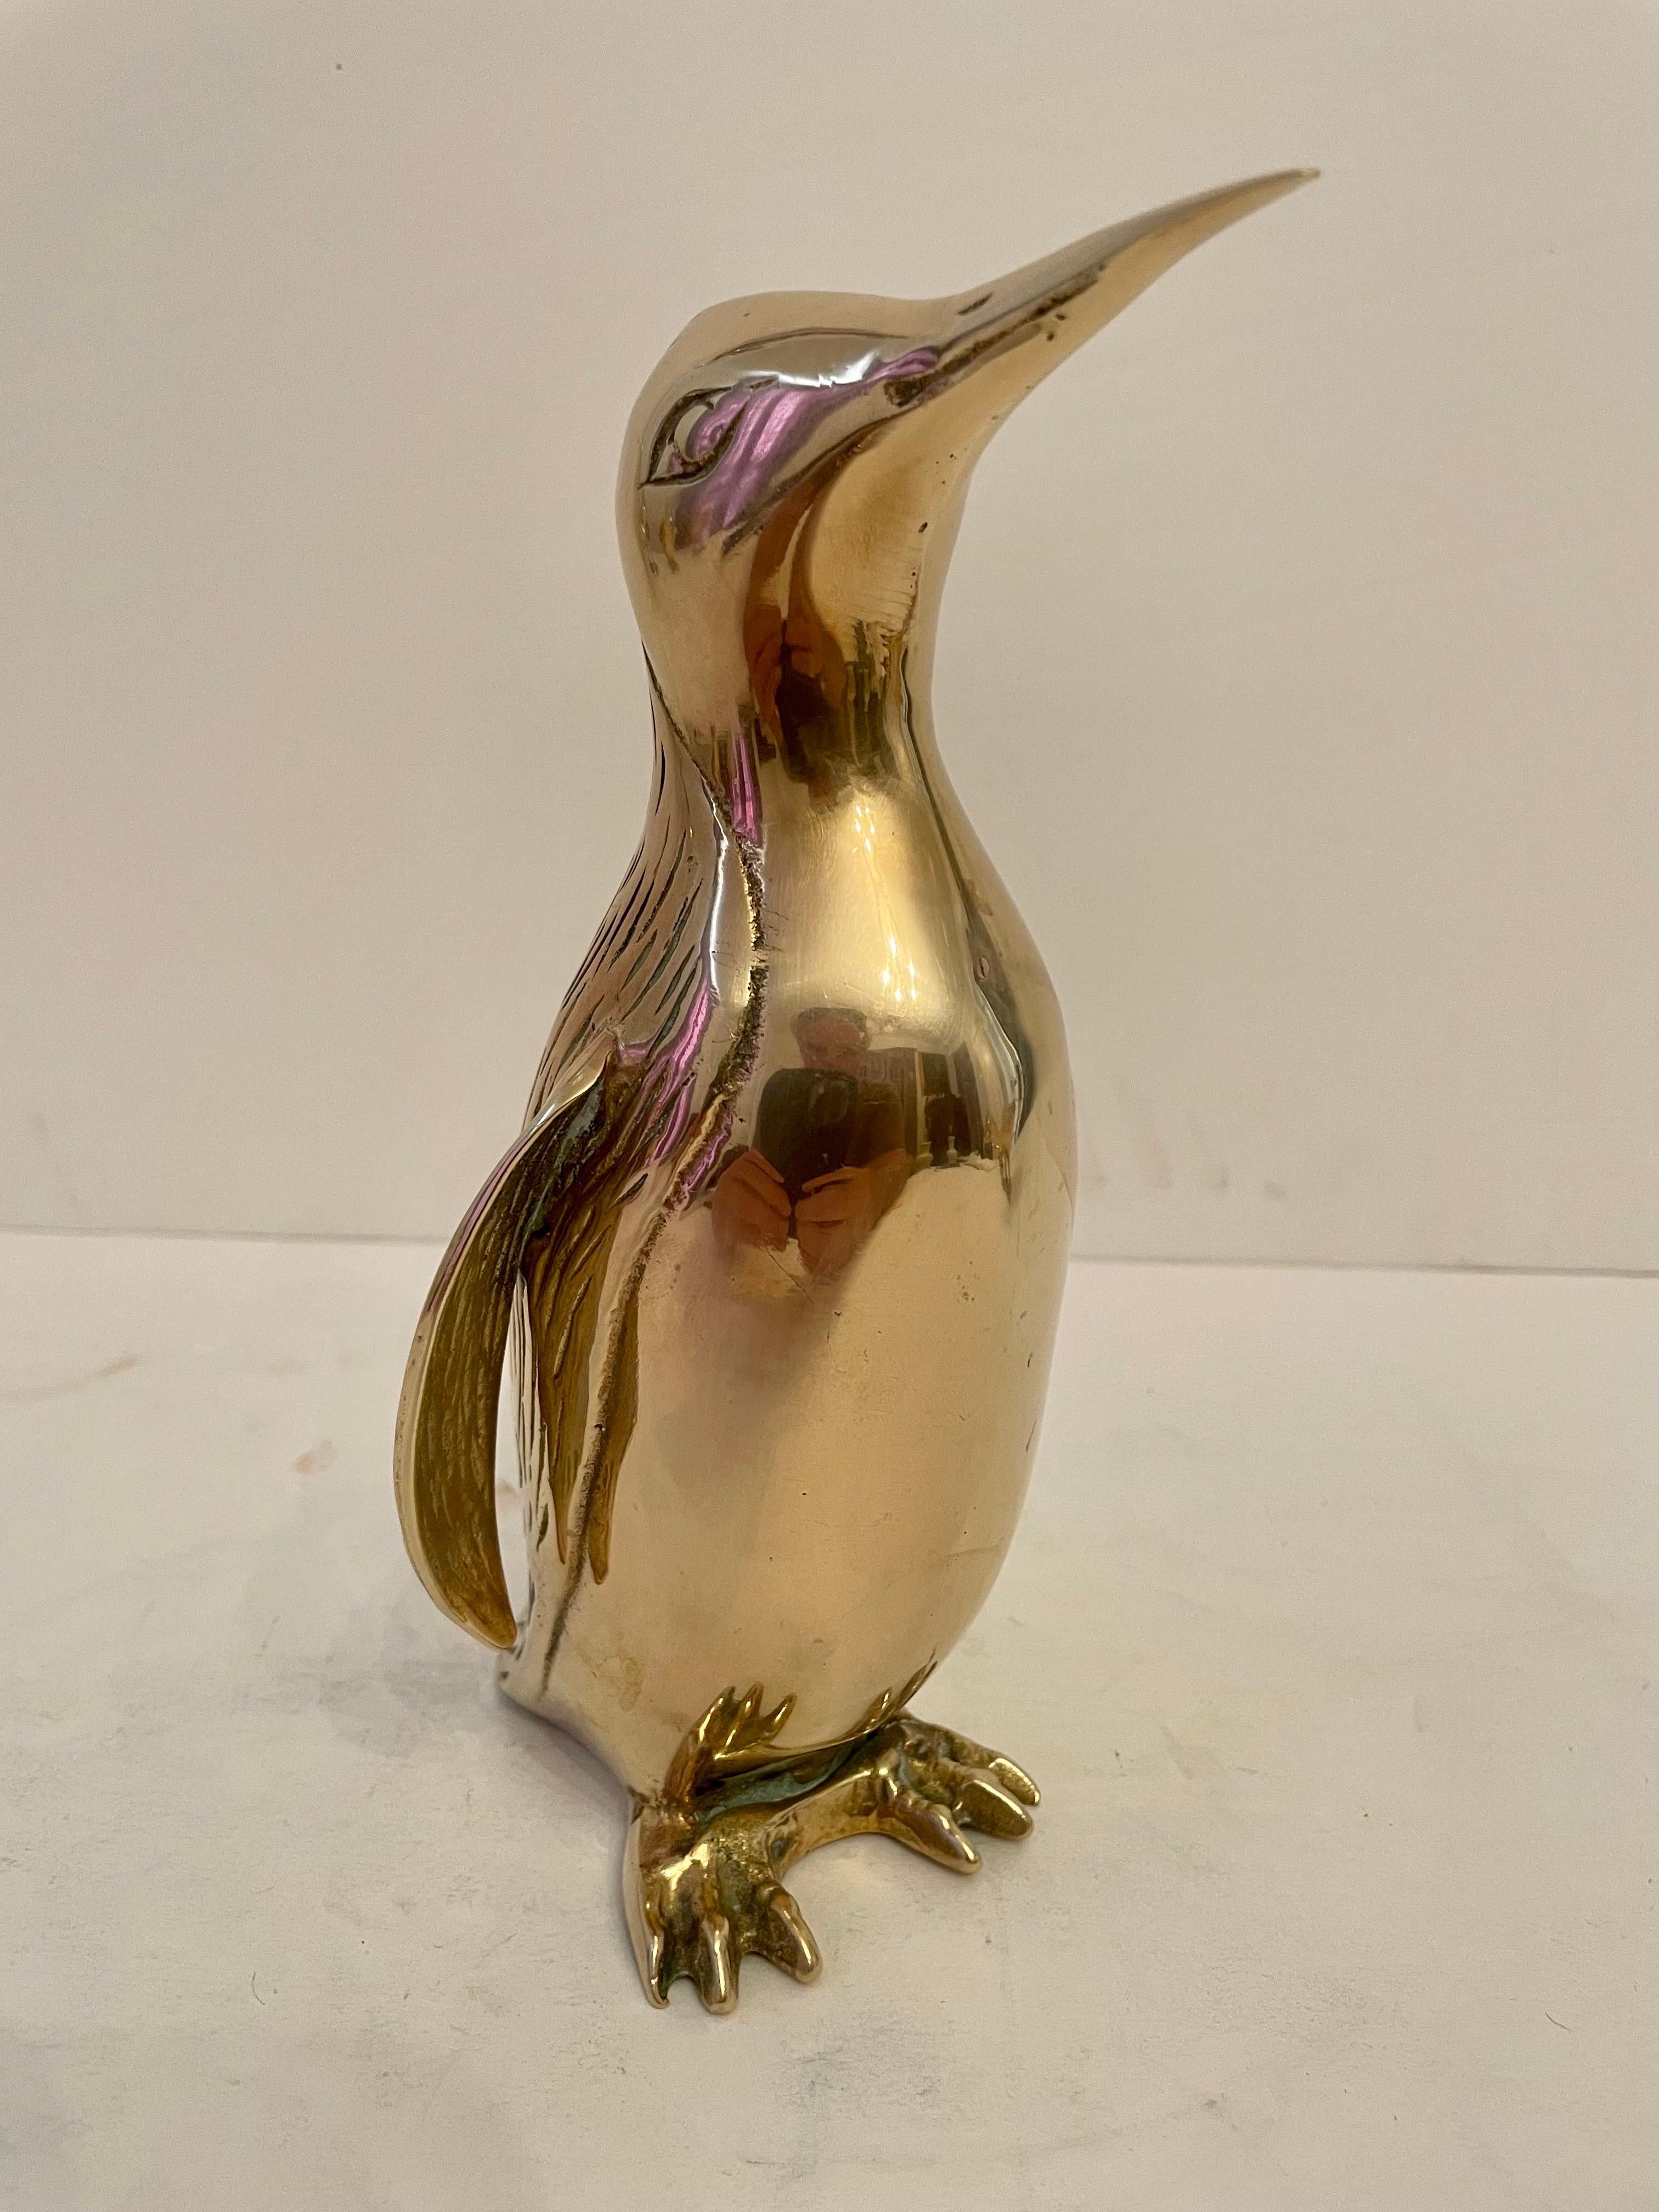 Vintage Hollywood Regency brass Penguin sculpture. Nicely detailed. Hand polished. Good overall condition. Dark spots are reflection of light in photos. Measures 8” tall x 4” wide x 4.25” deep.